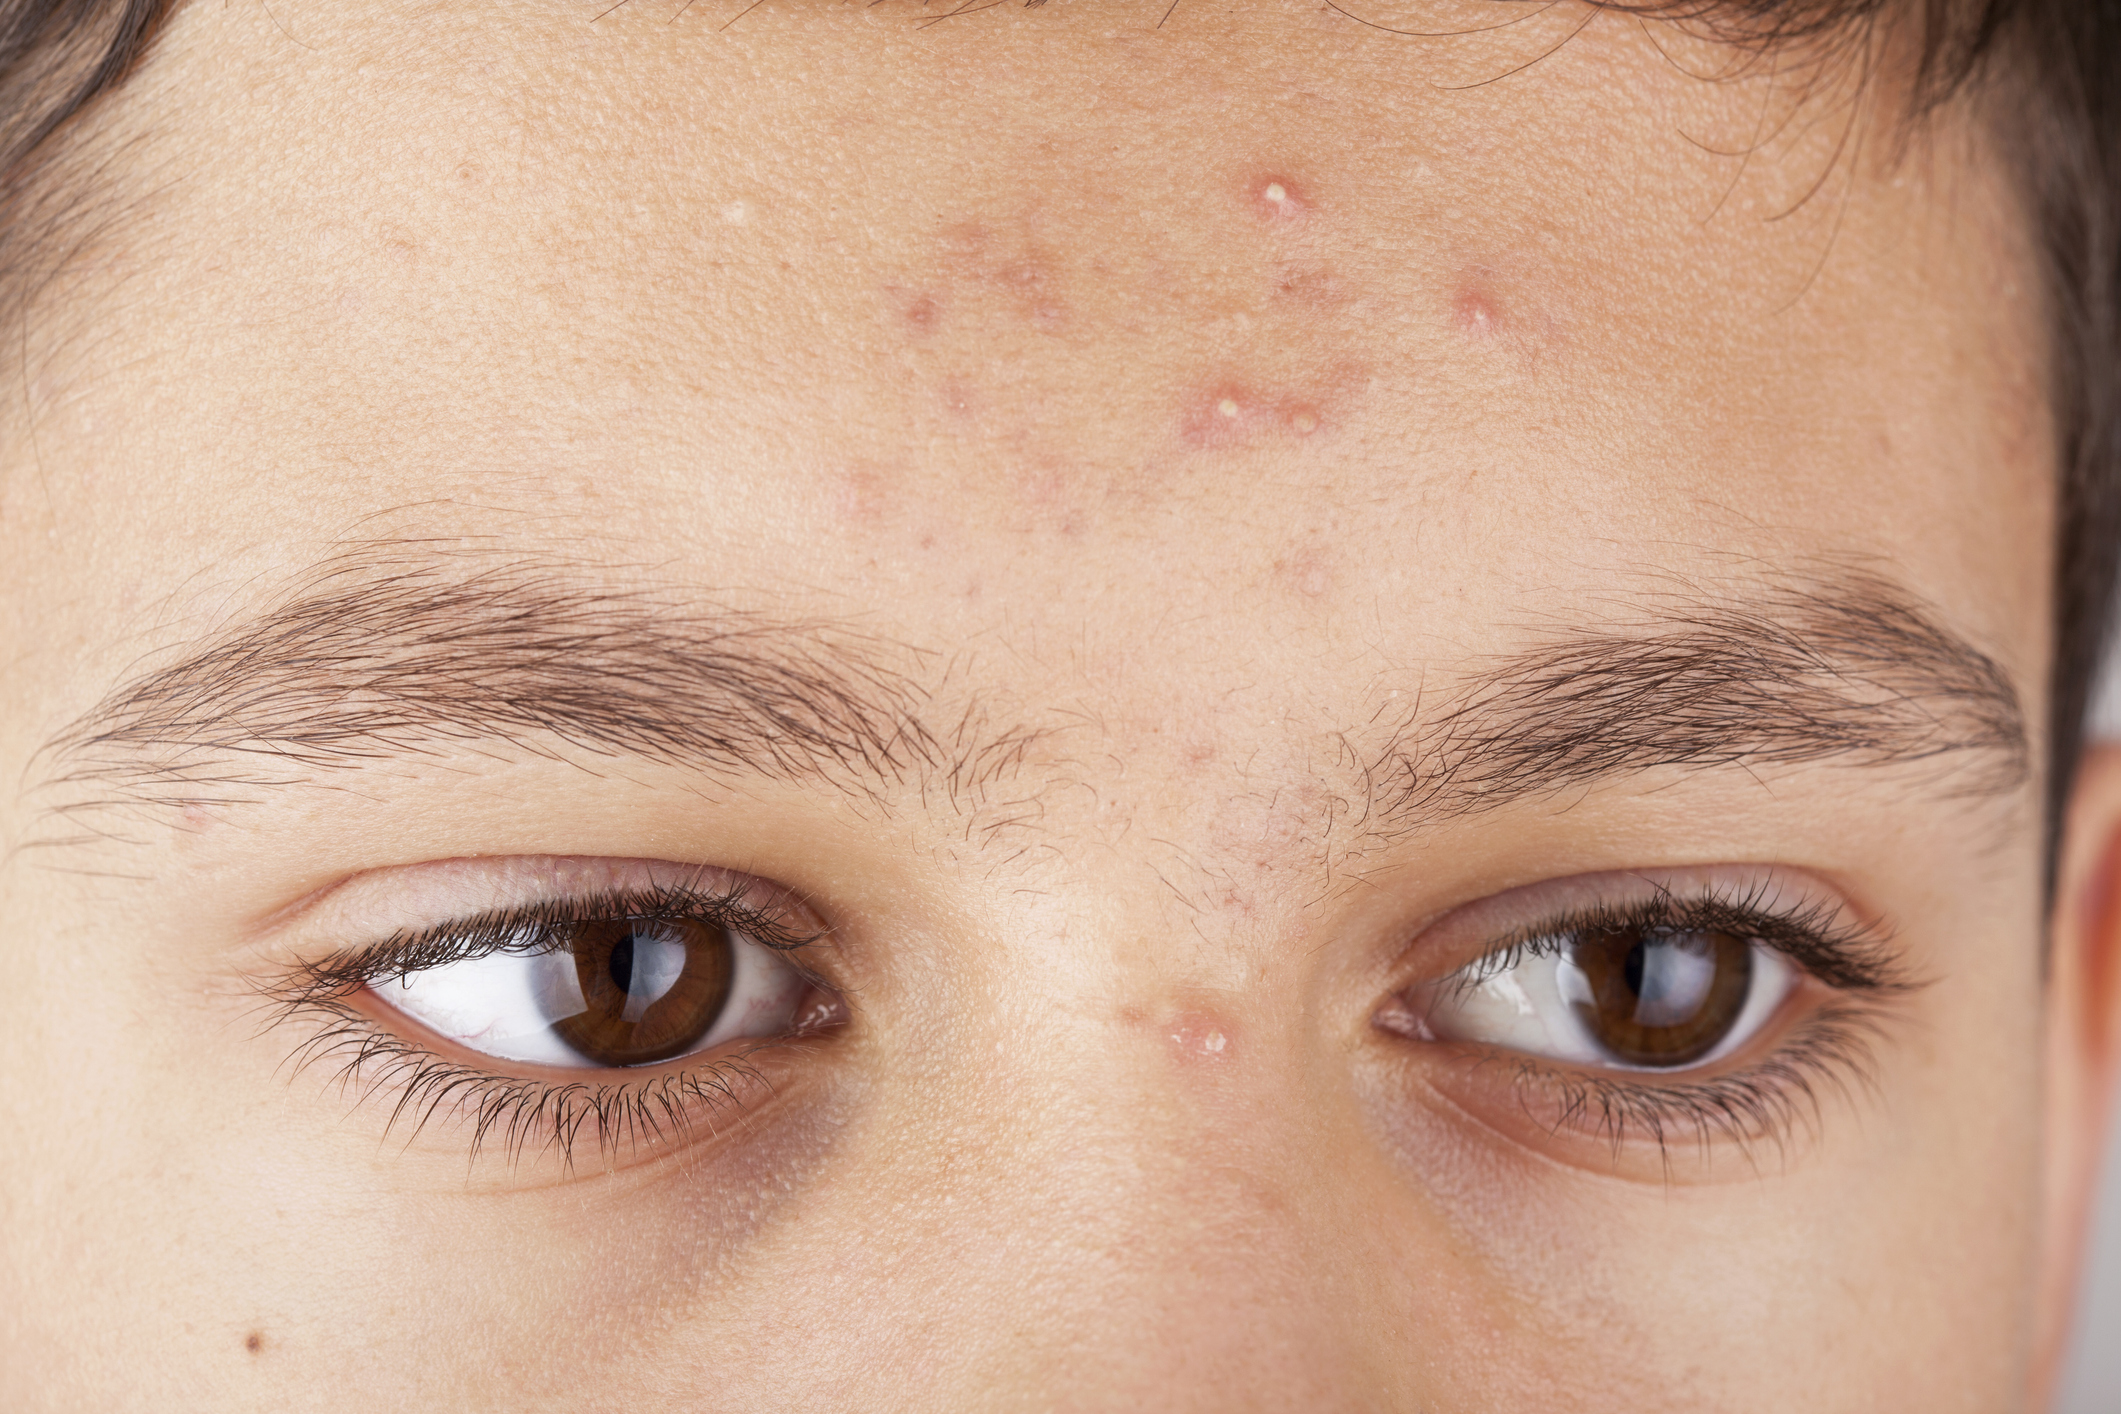 Acne: Signs and symptoms